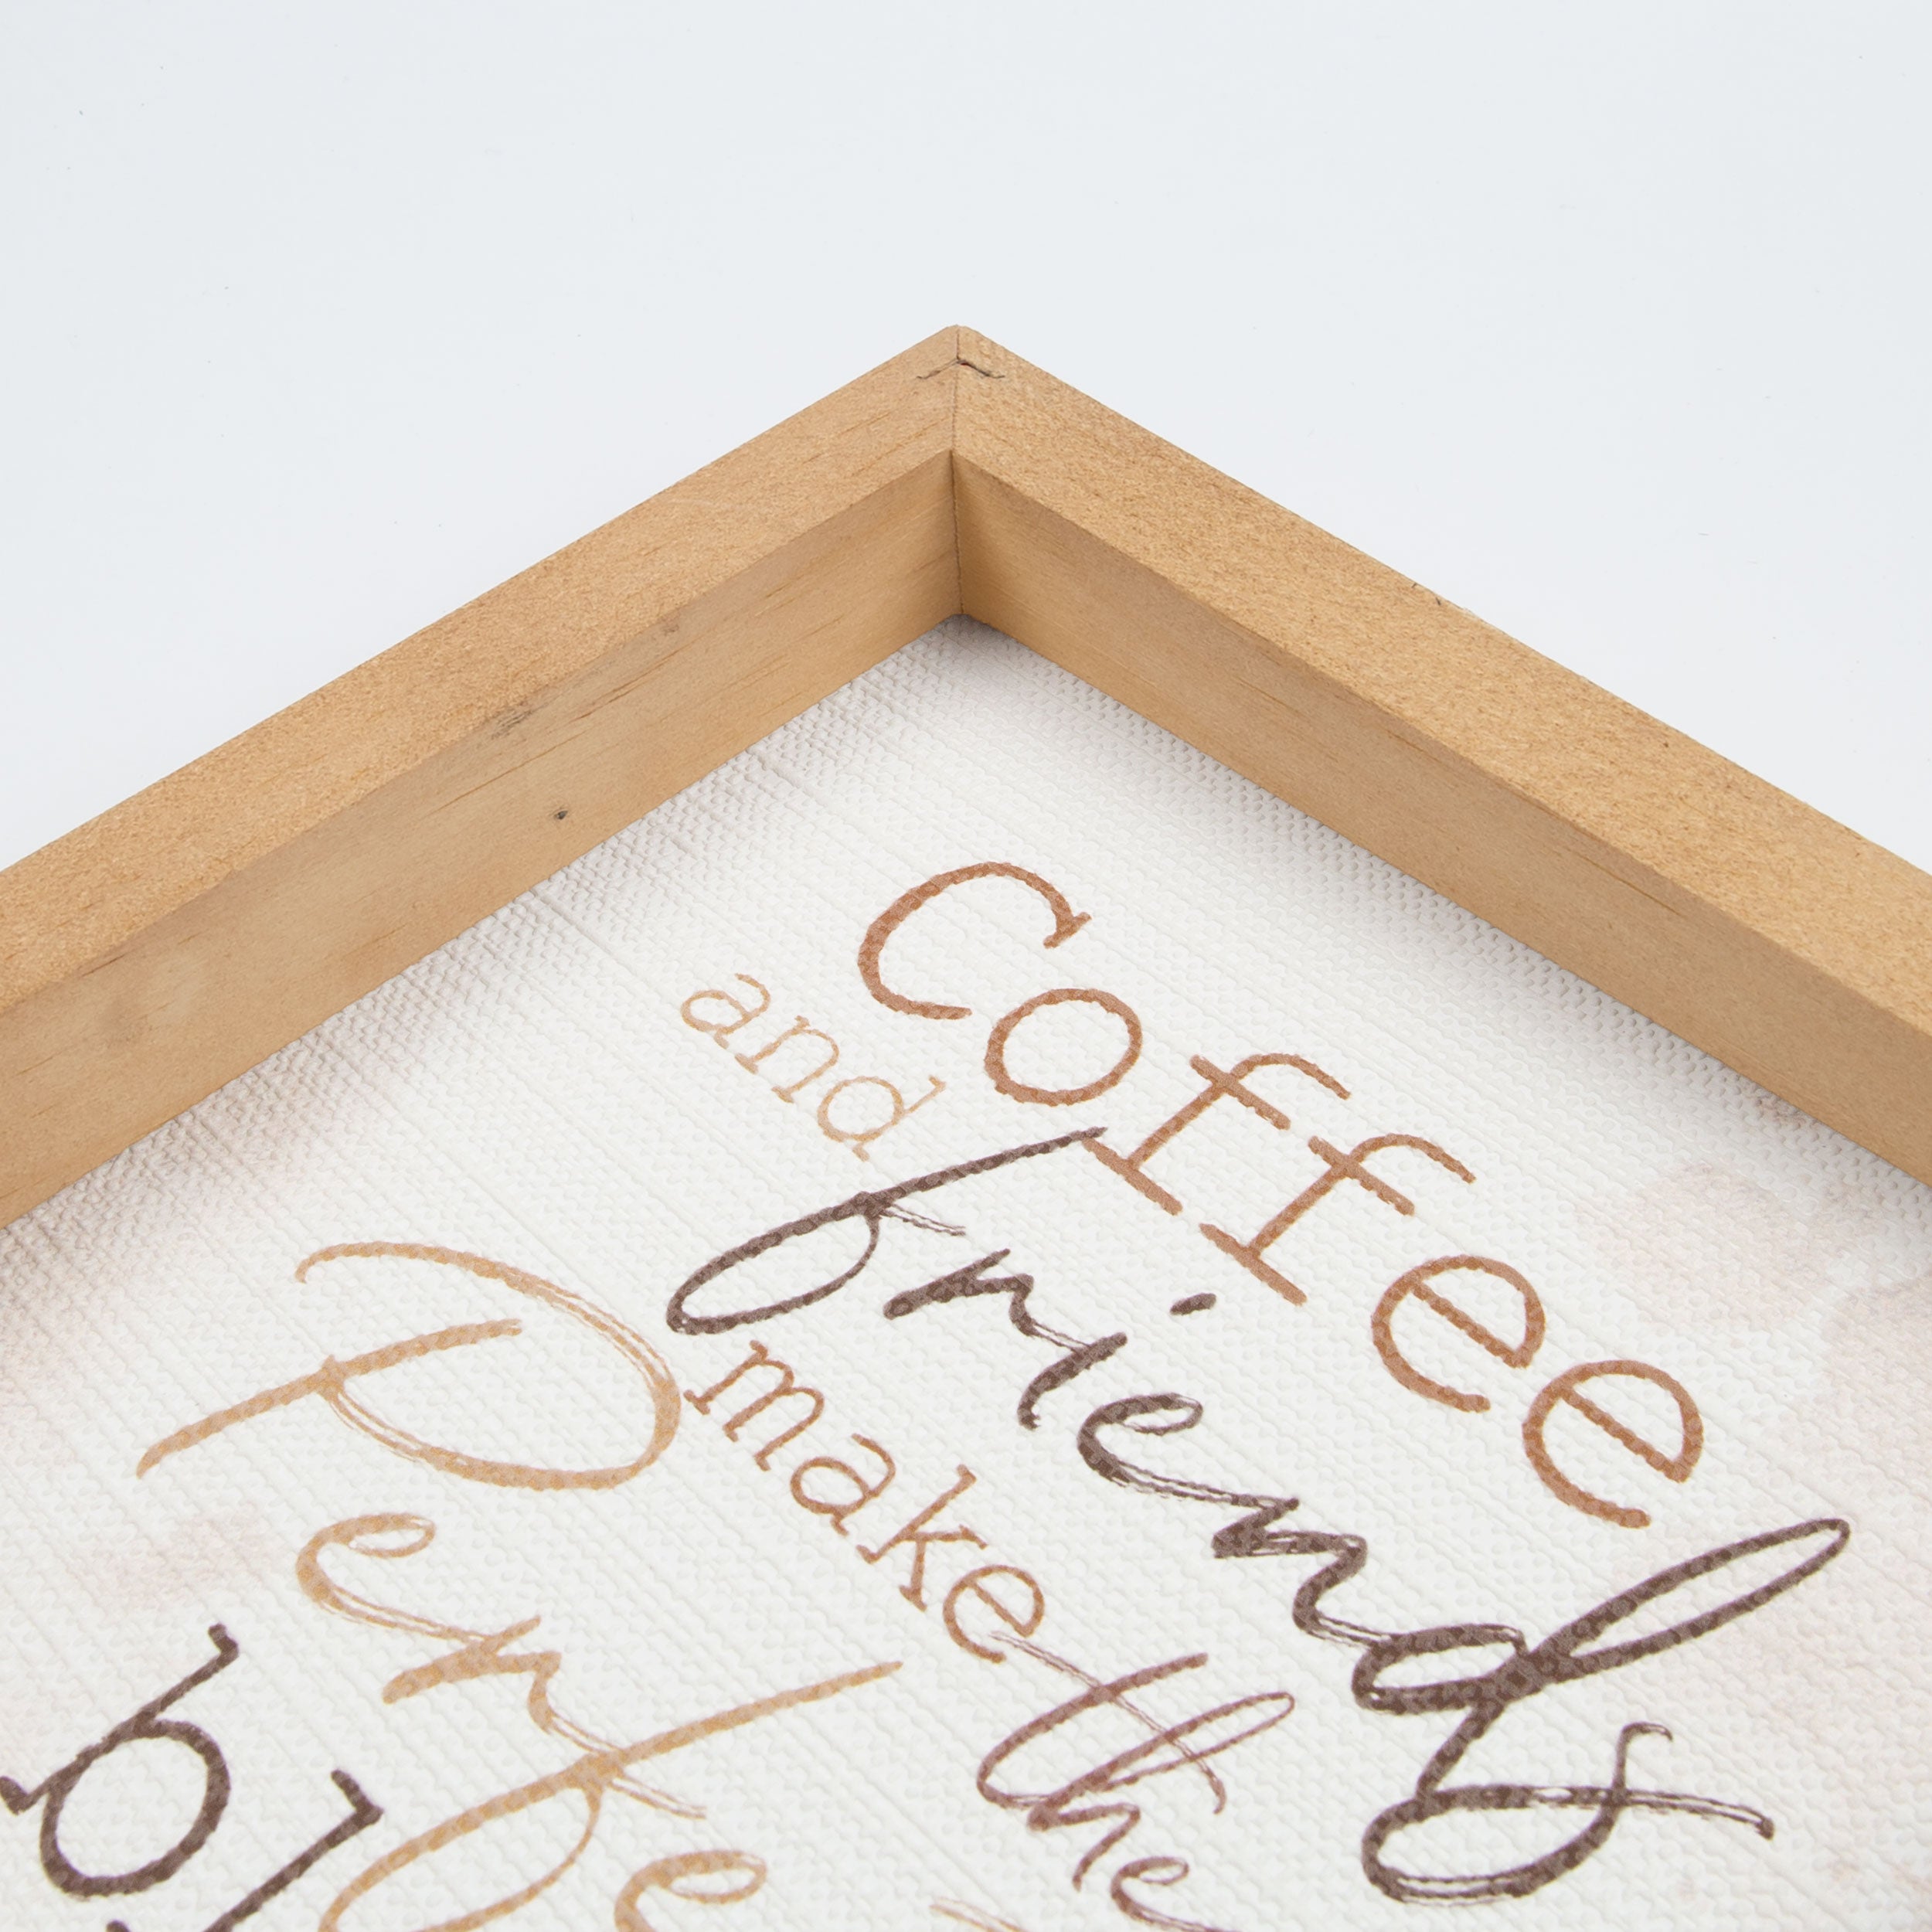 *Coffee And Friends Make The Perfect Blend Framed Art